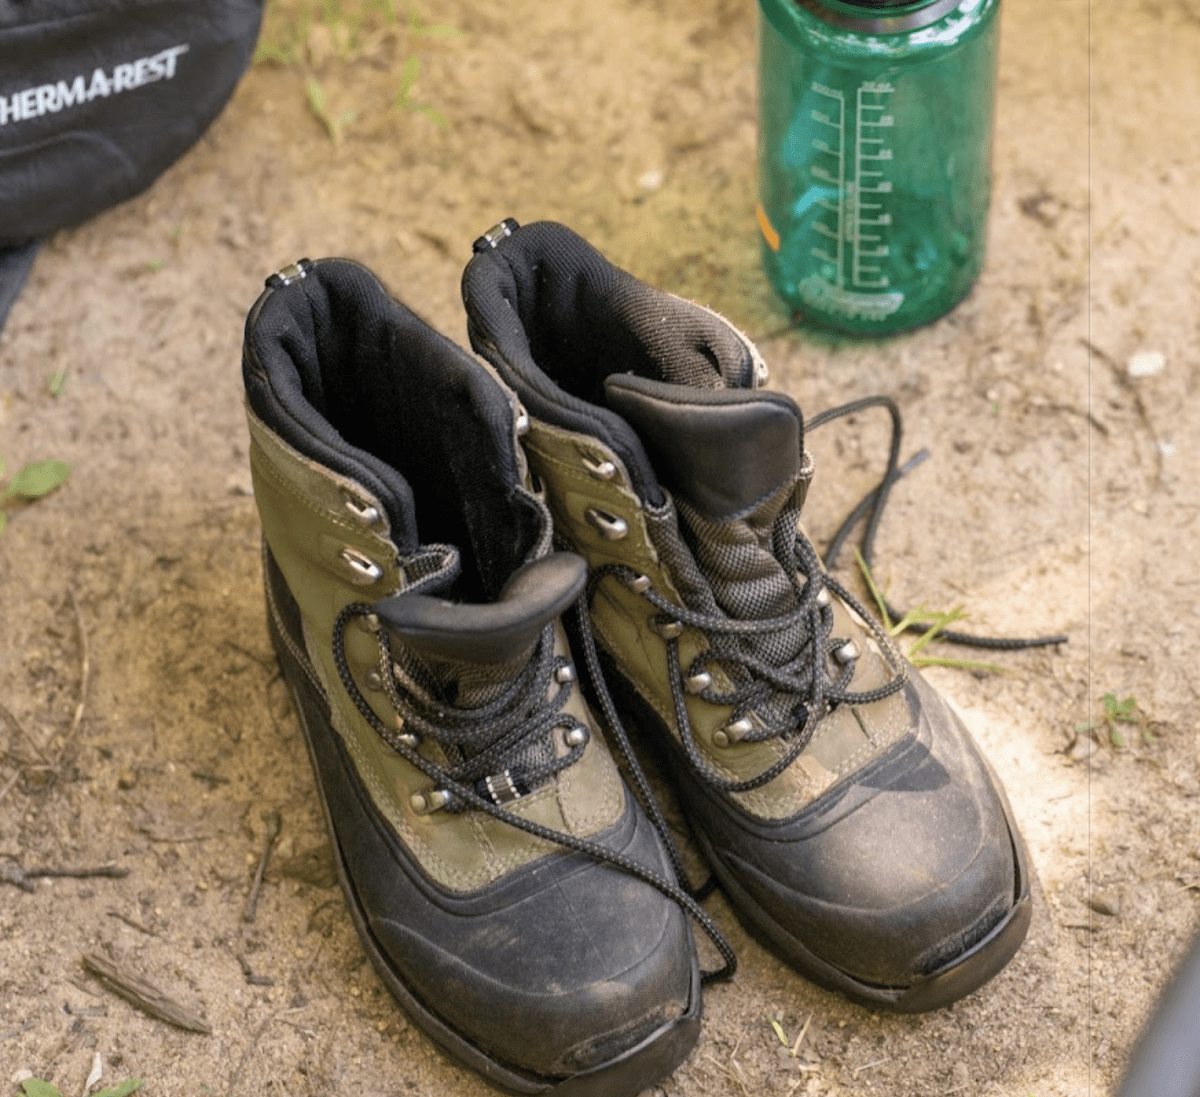 A pair of hiking boots next to a Nalgene water bottle